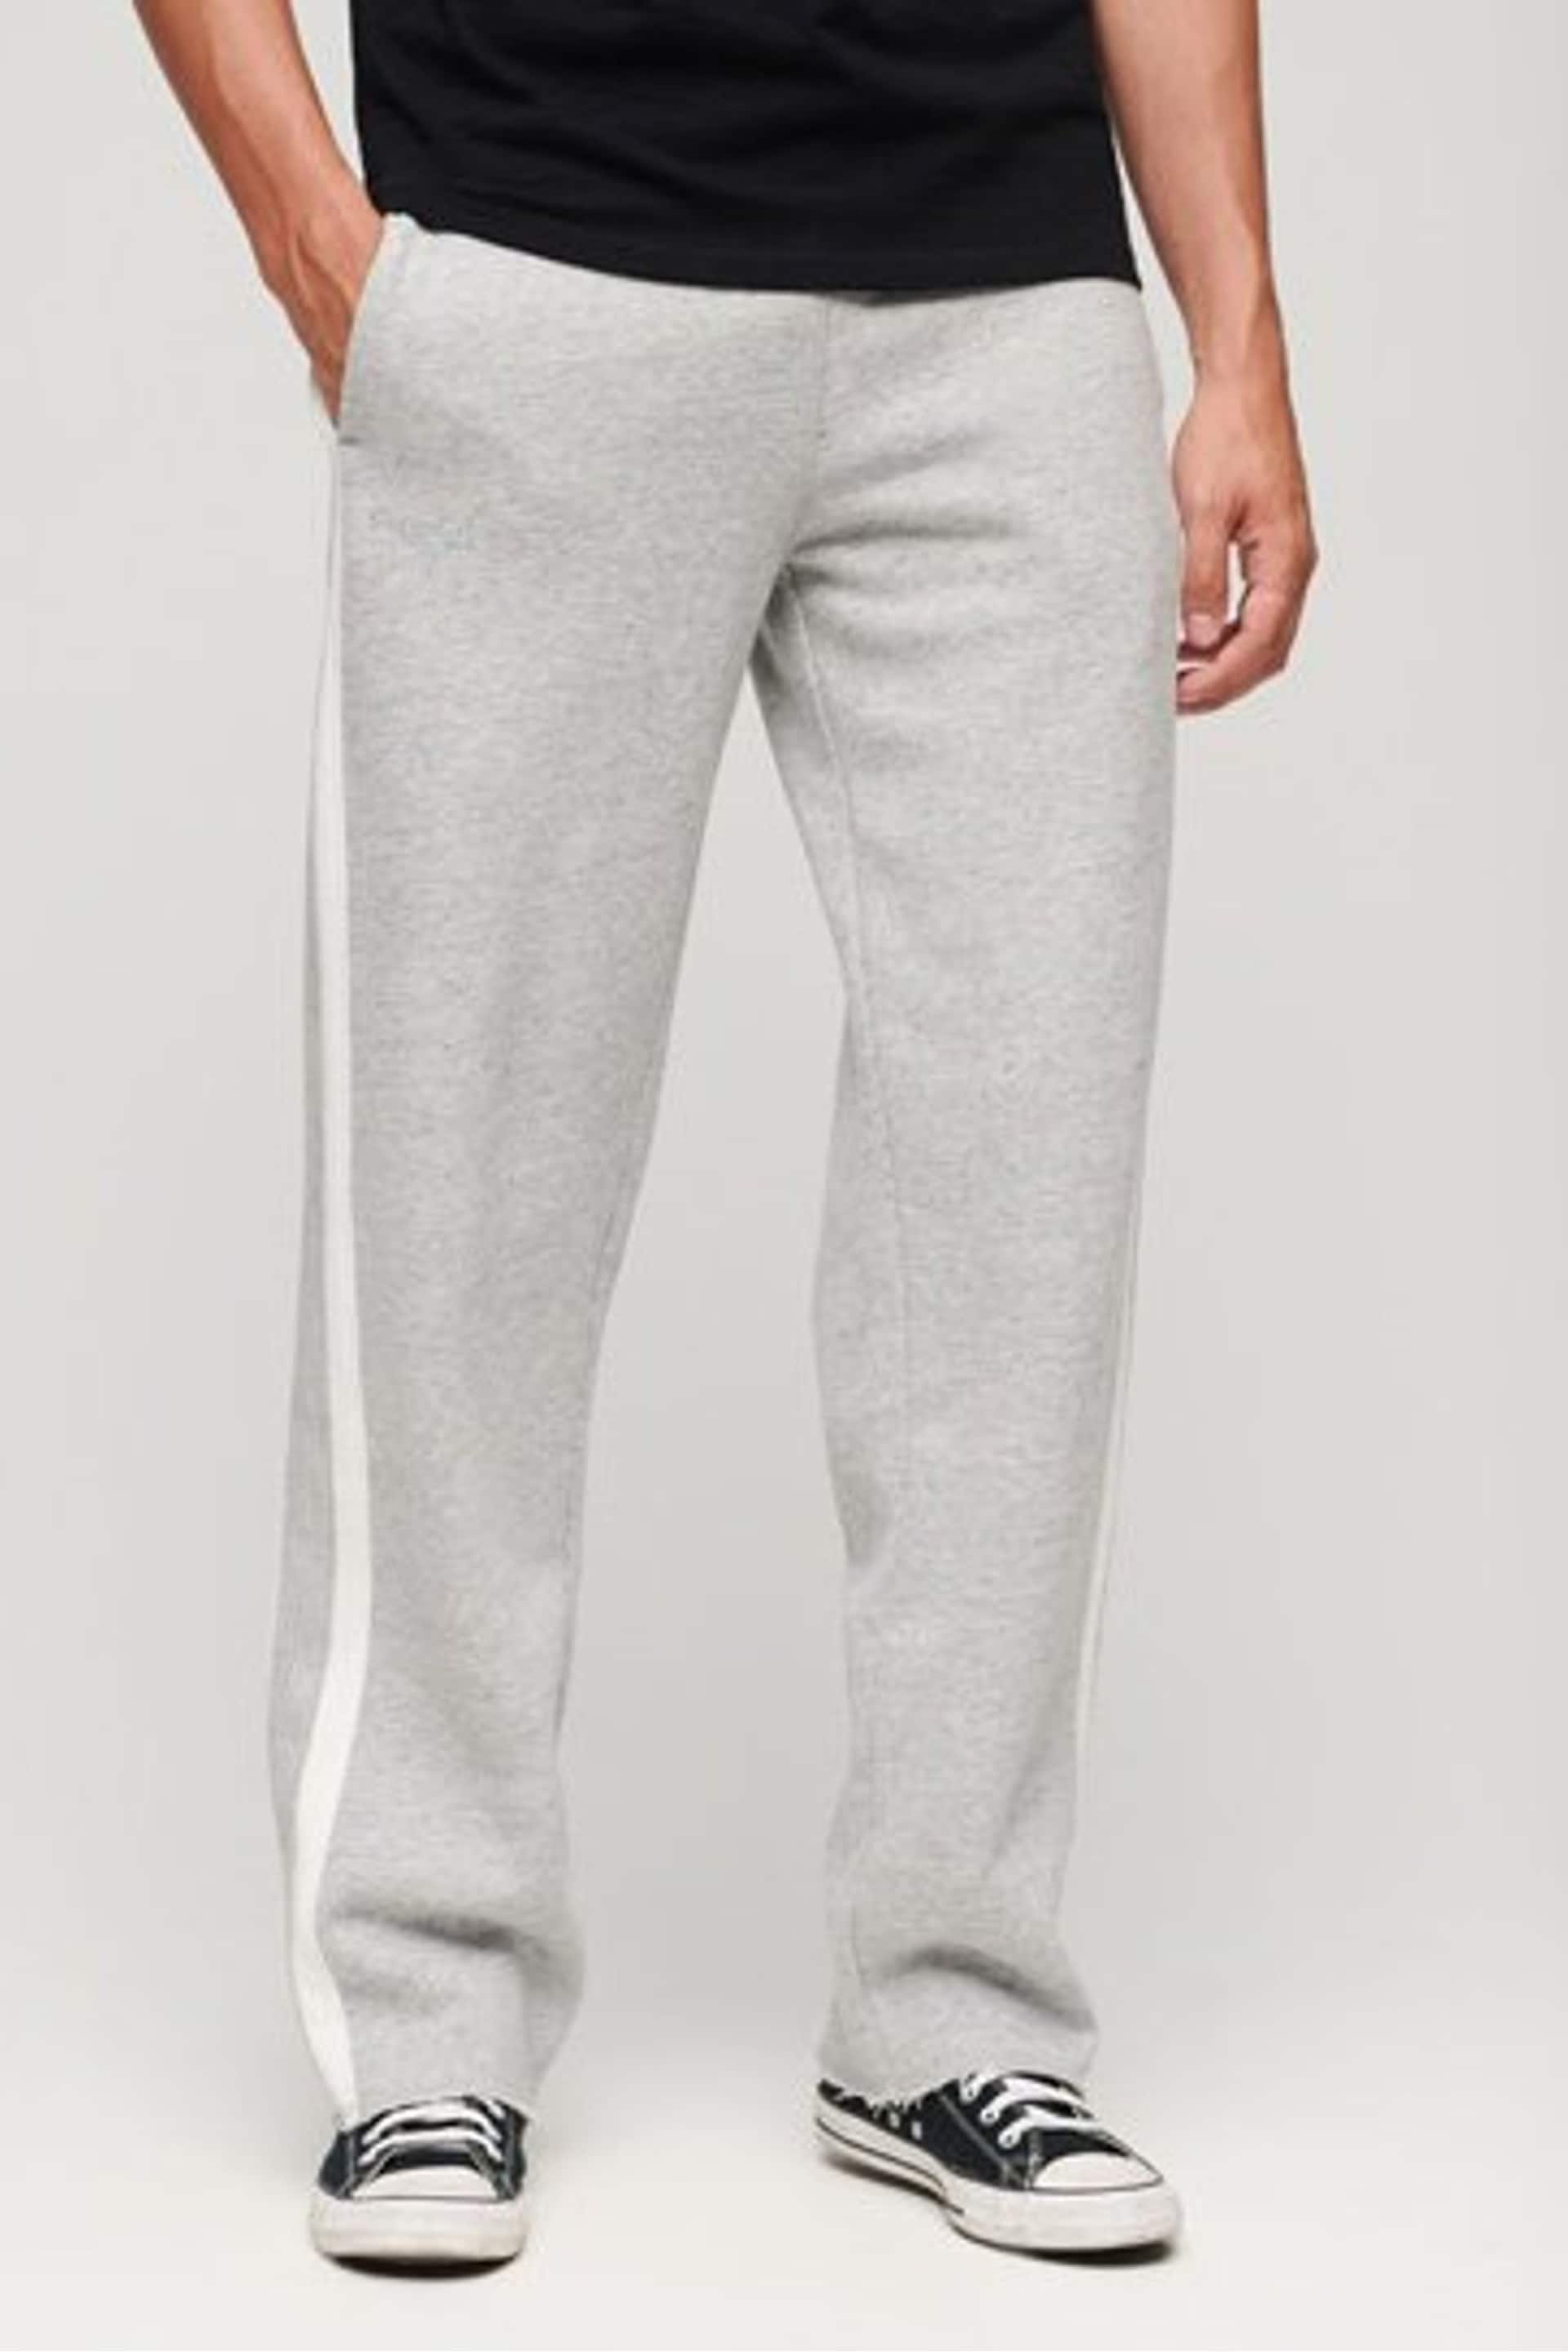 Superdry Grey Essential Straight Joggers - Image 1 of 9